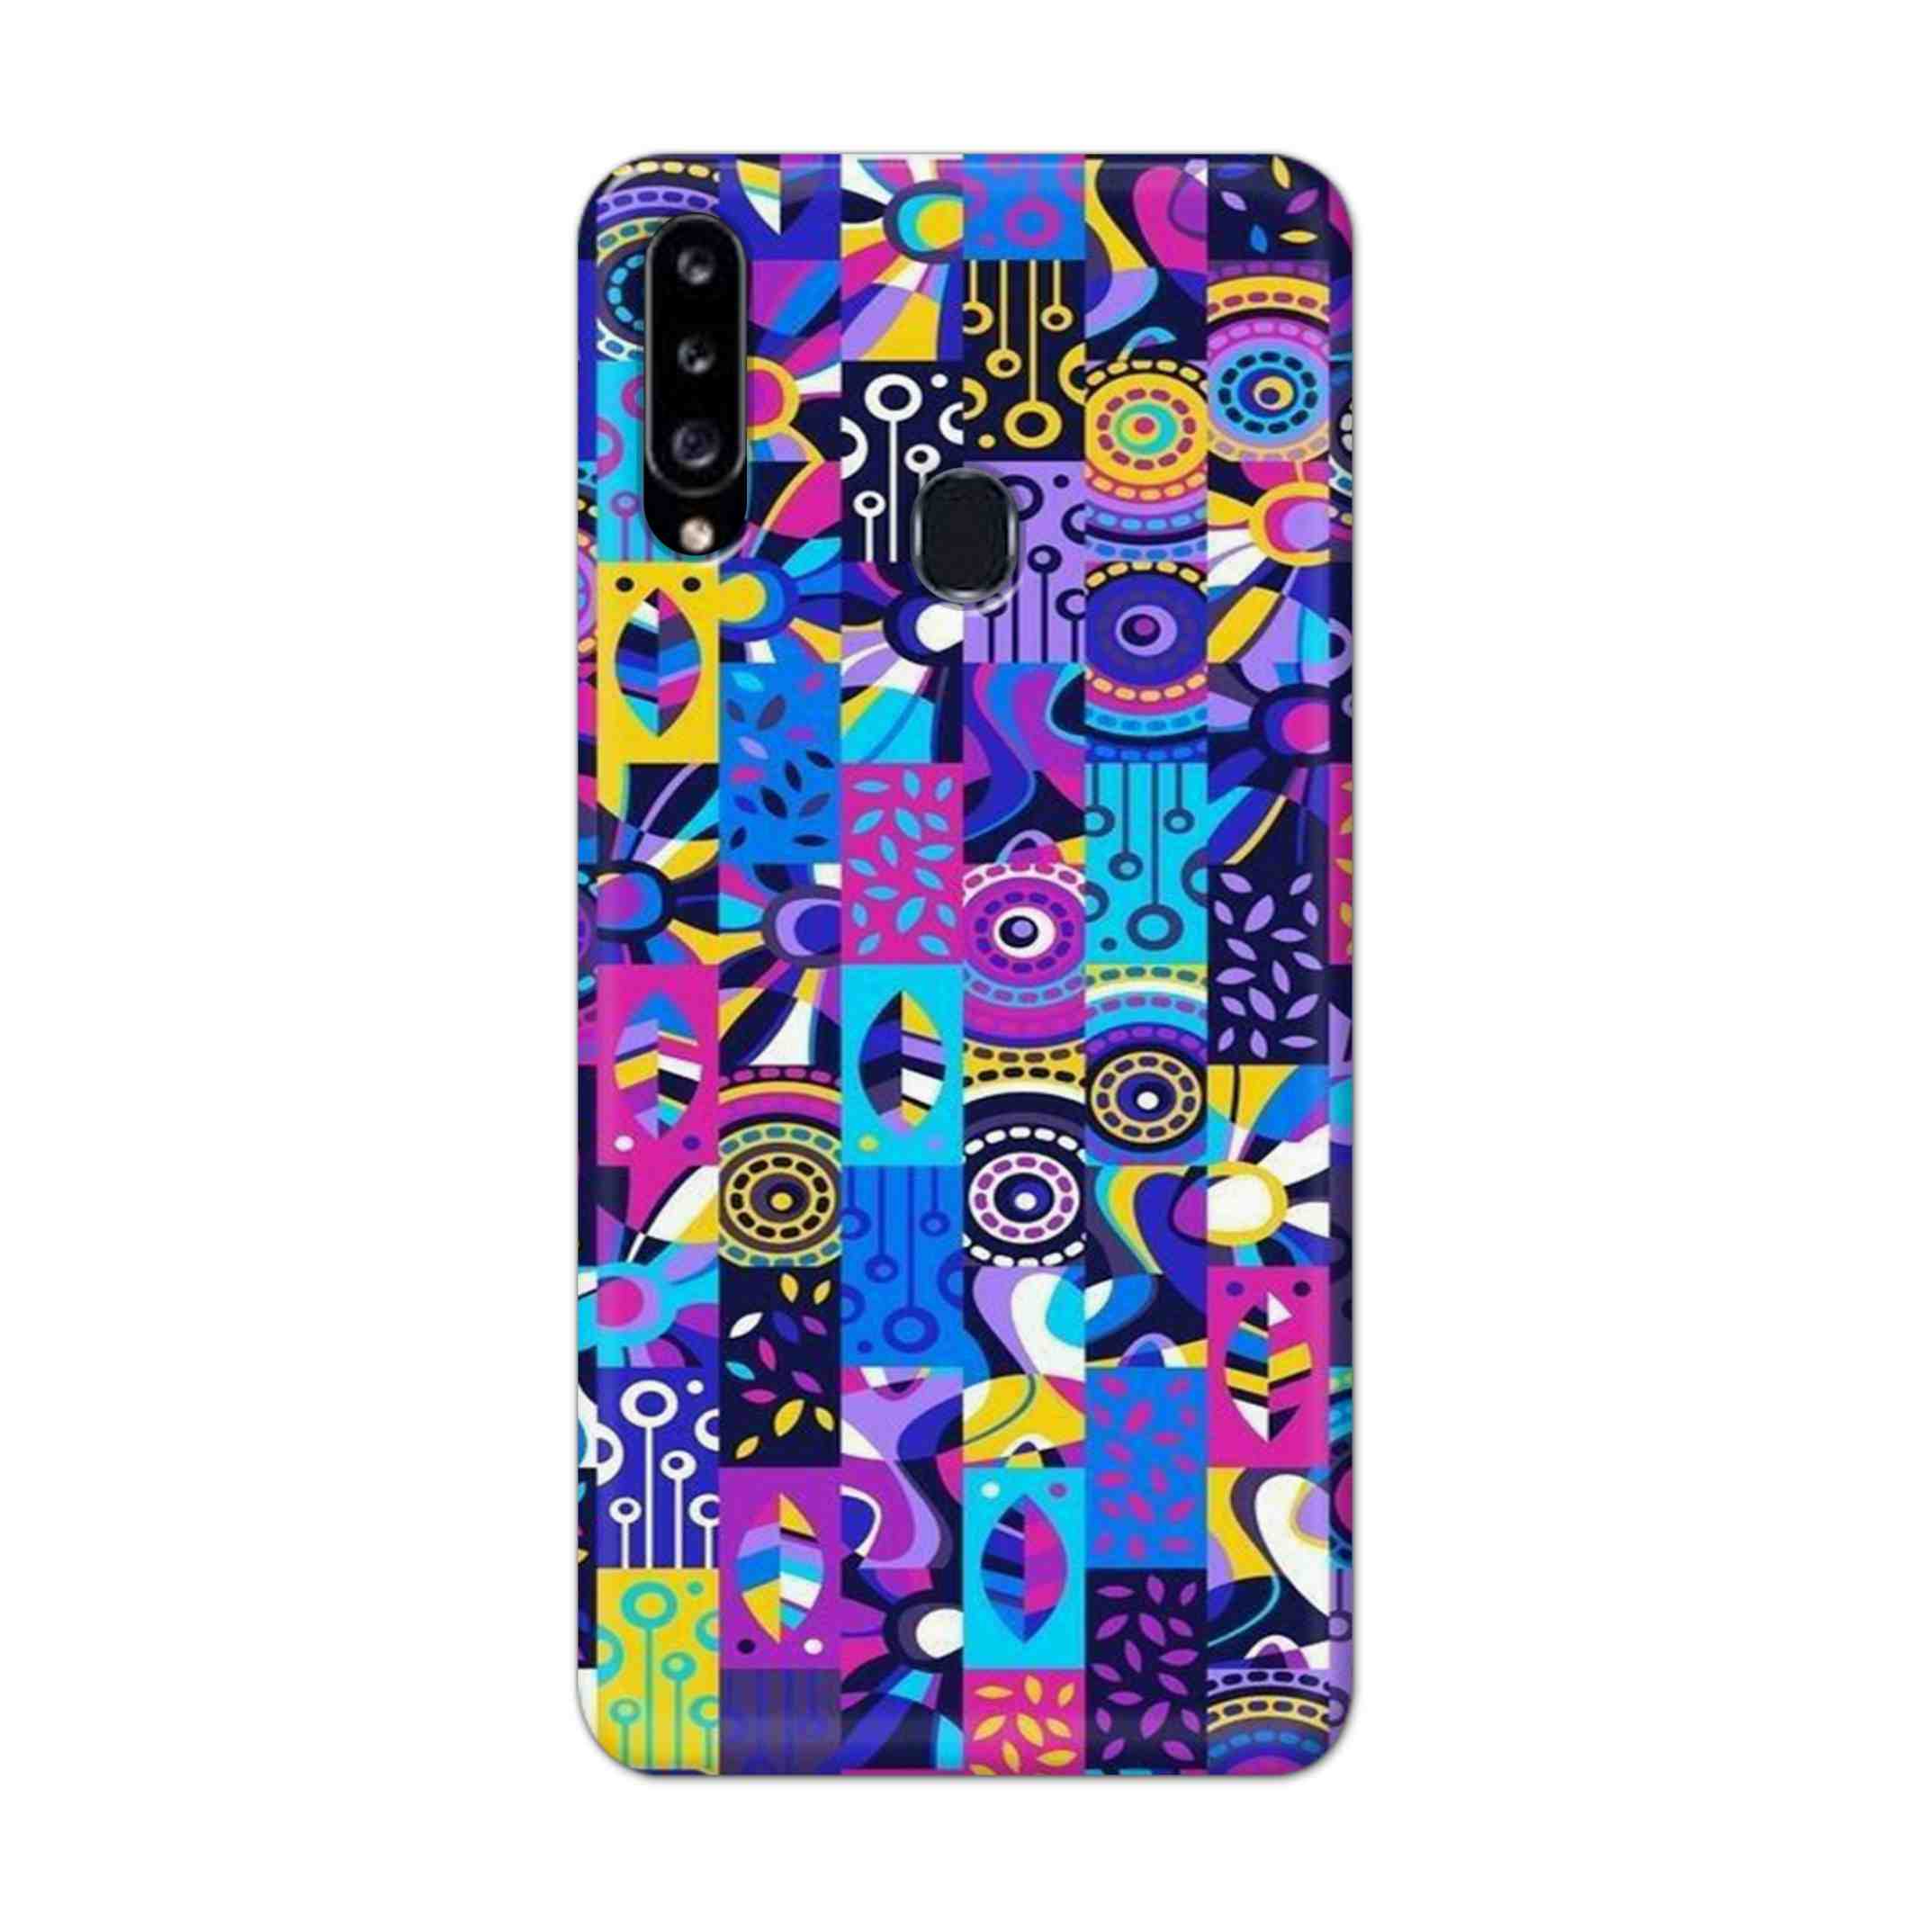 Buy Rainbow Art Hard Back Mobile Phone Case Cover For Samsung Galaxy A21 Online